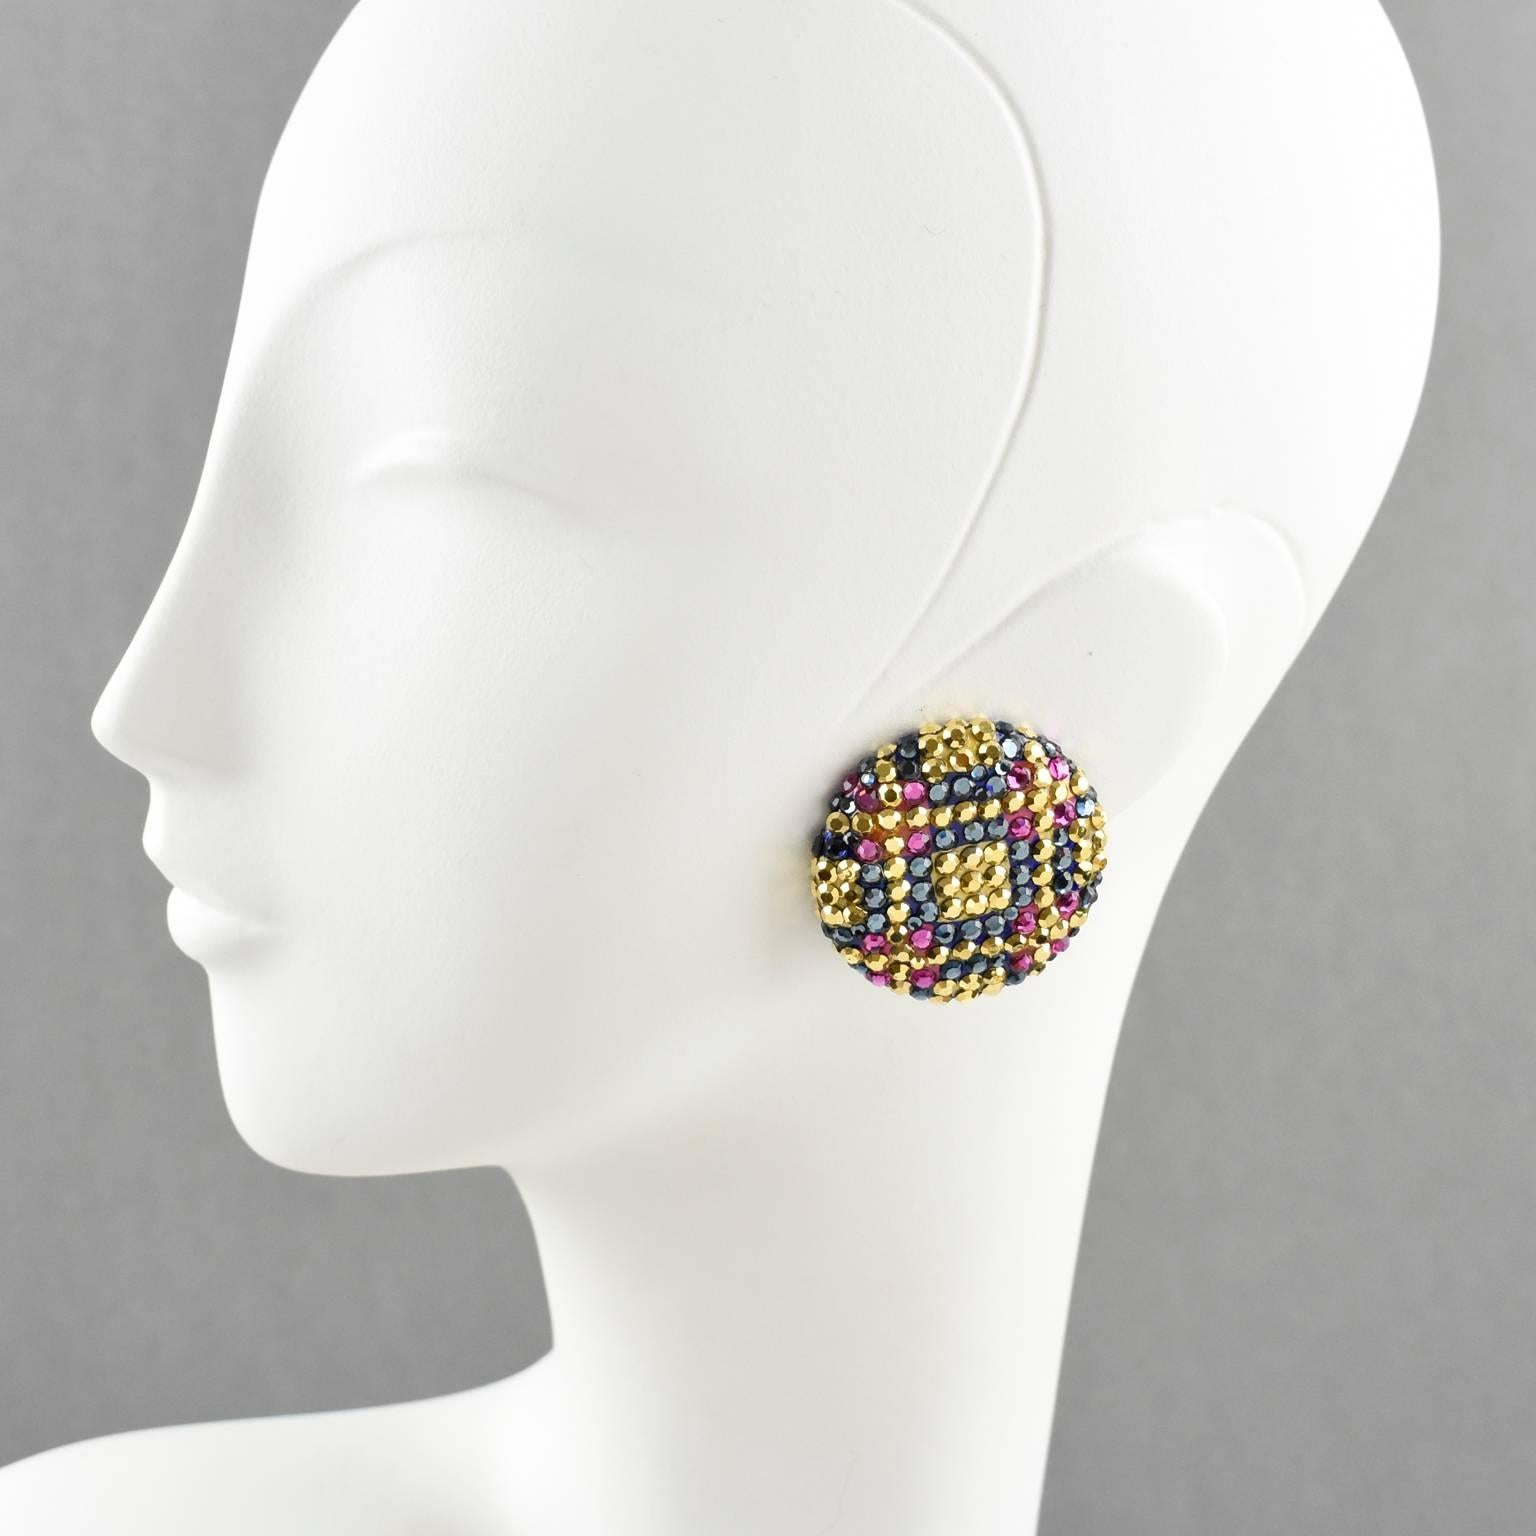 Elegant pair of impressive statement clip-on earrings designed by Richard Kerr in the 1980s. They are made up of his signature pave rhinestones. Featuring large round flat shape all covered with couture color crystal rhinestones in a tweed design on